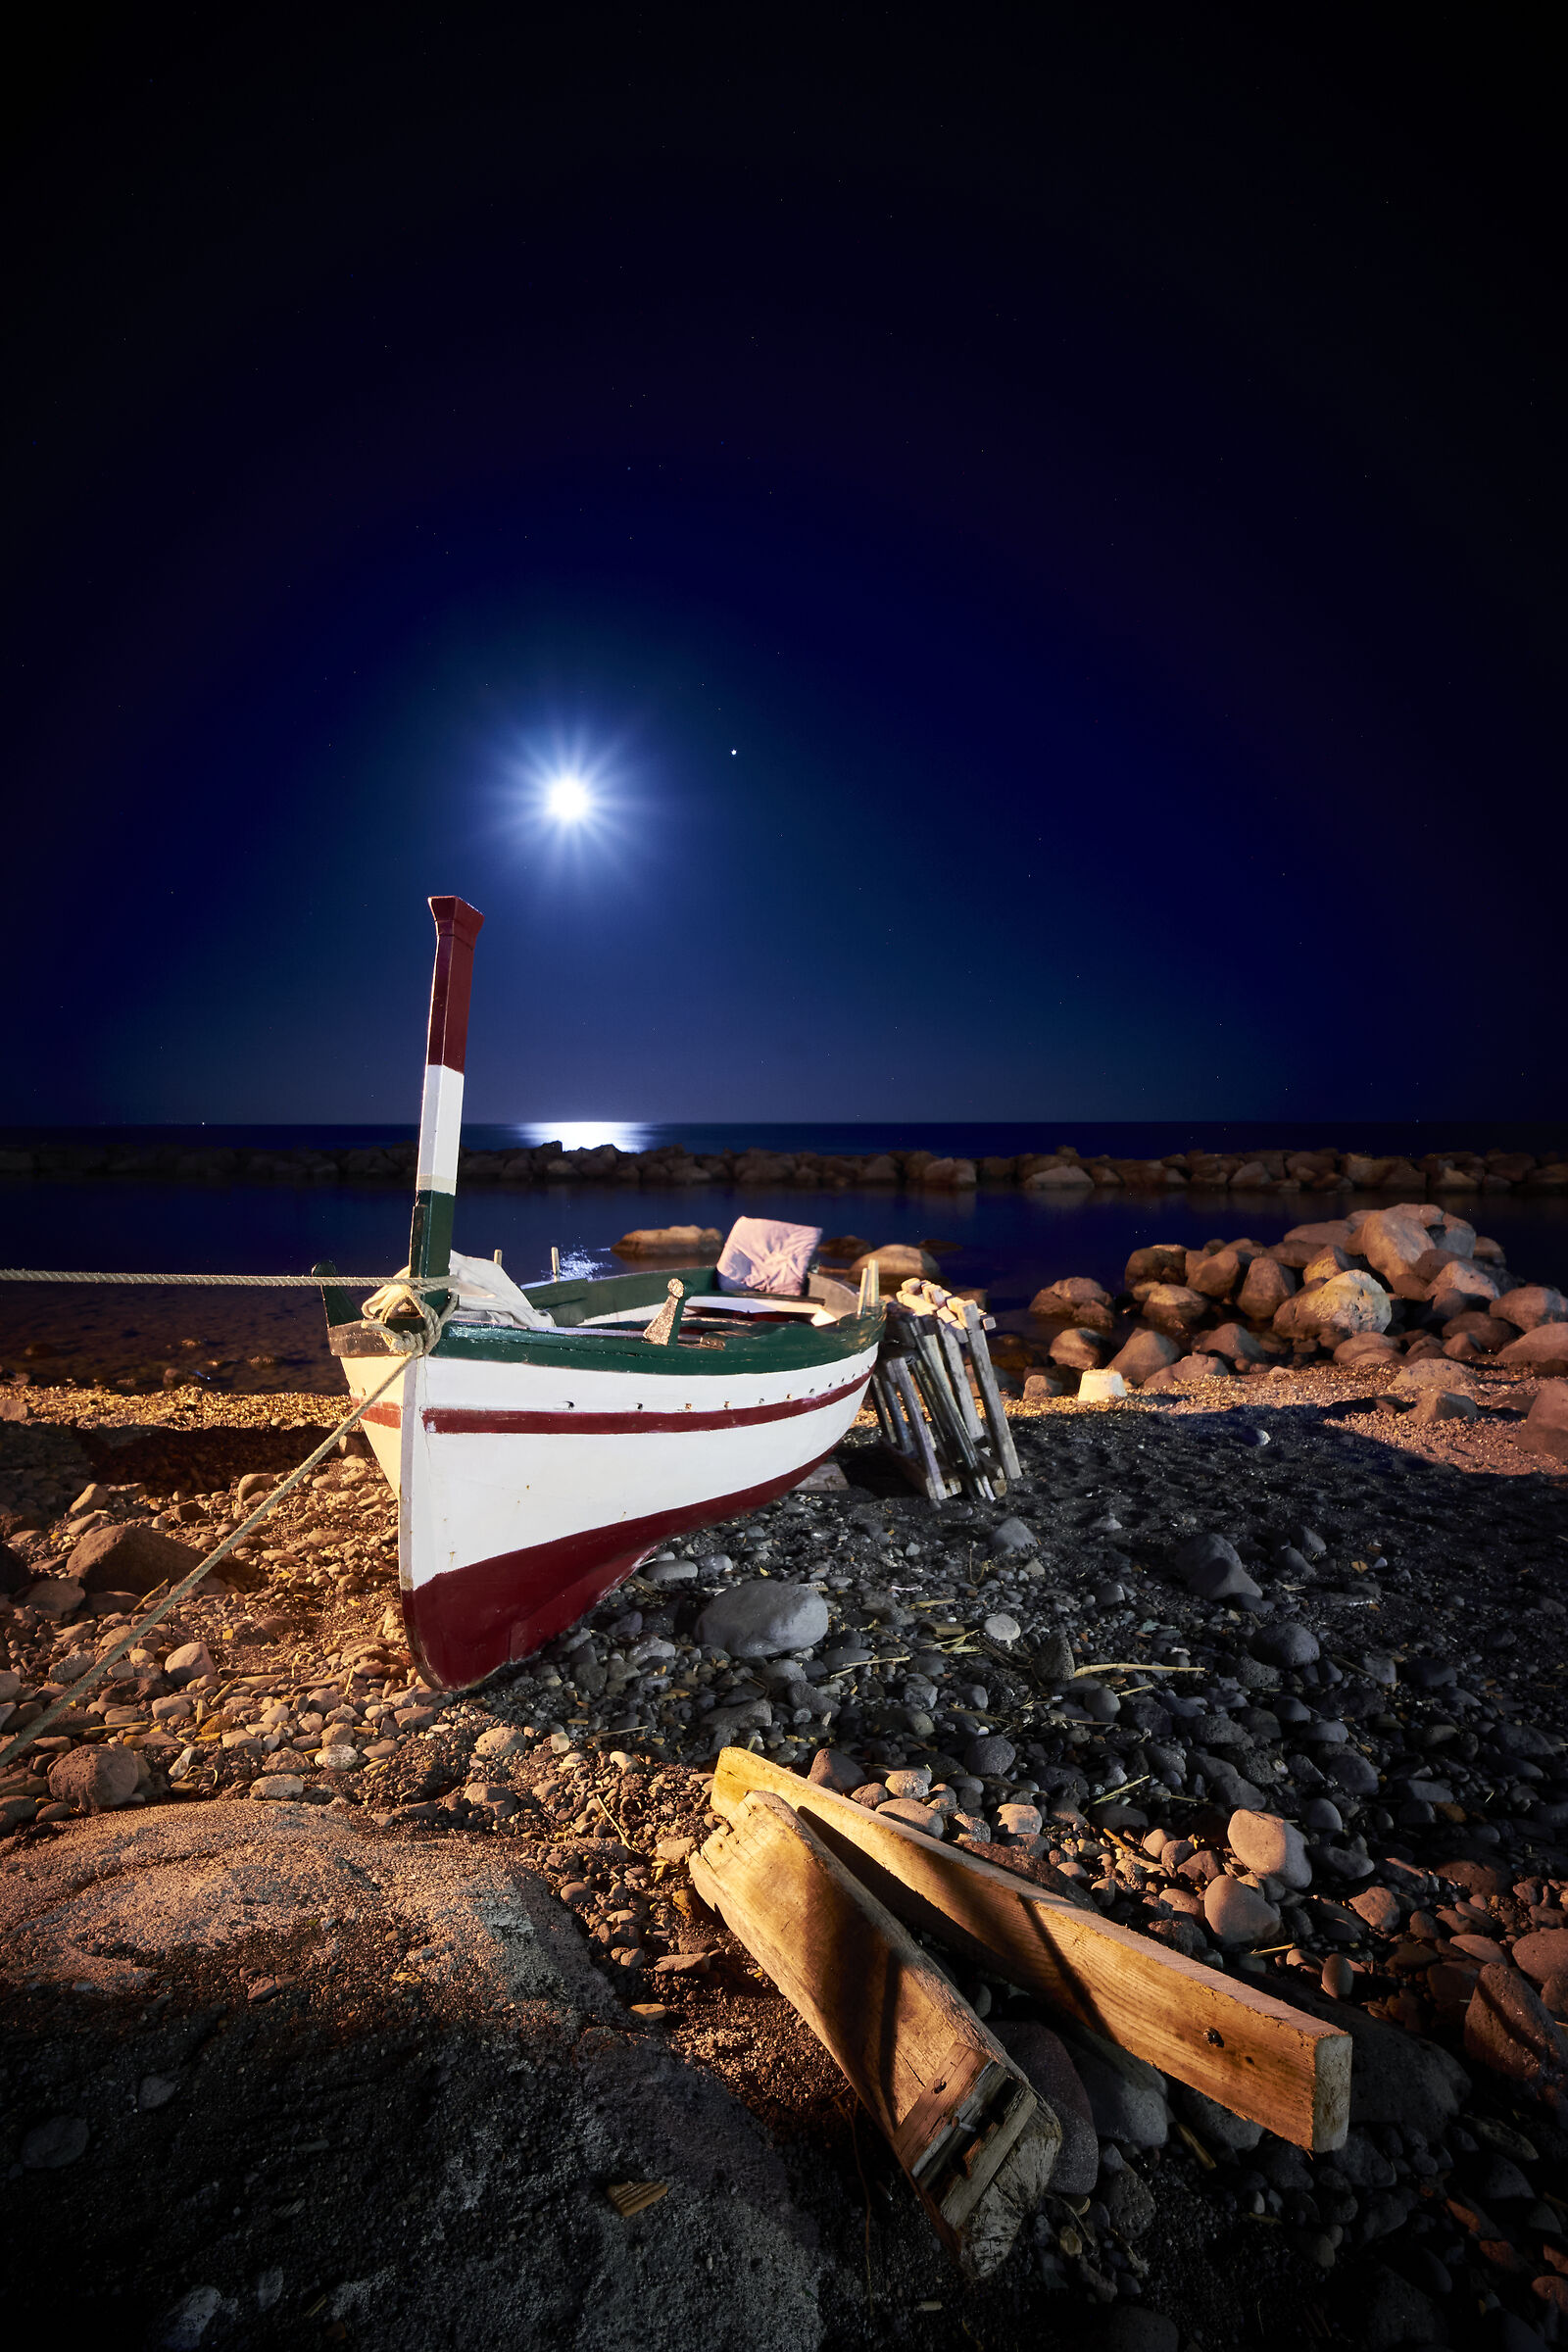 Boat in the moonlight...